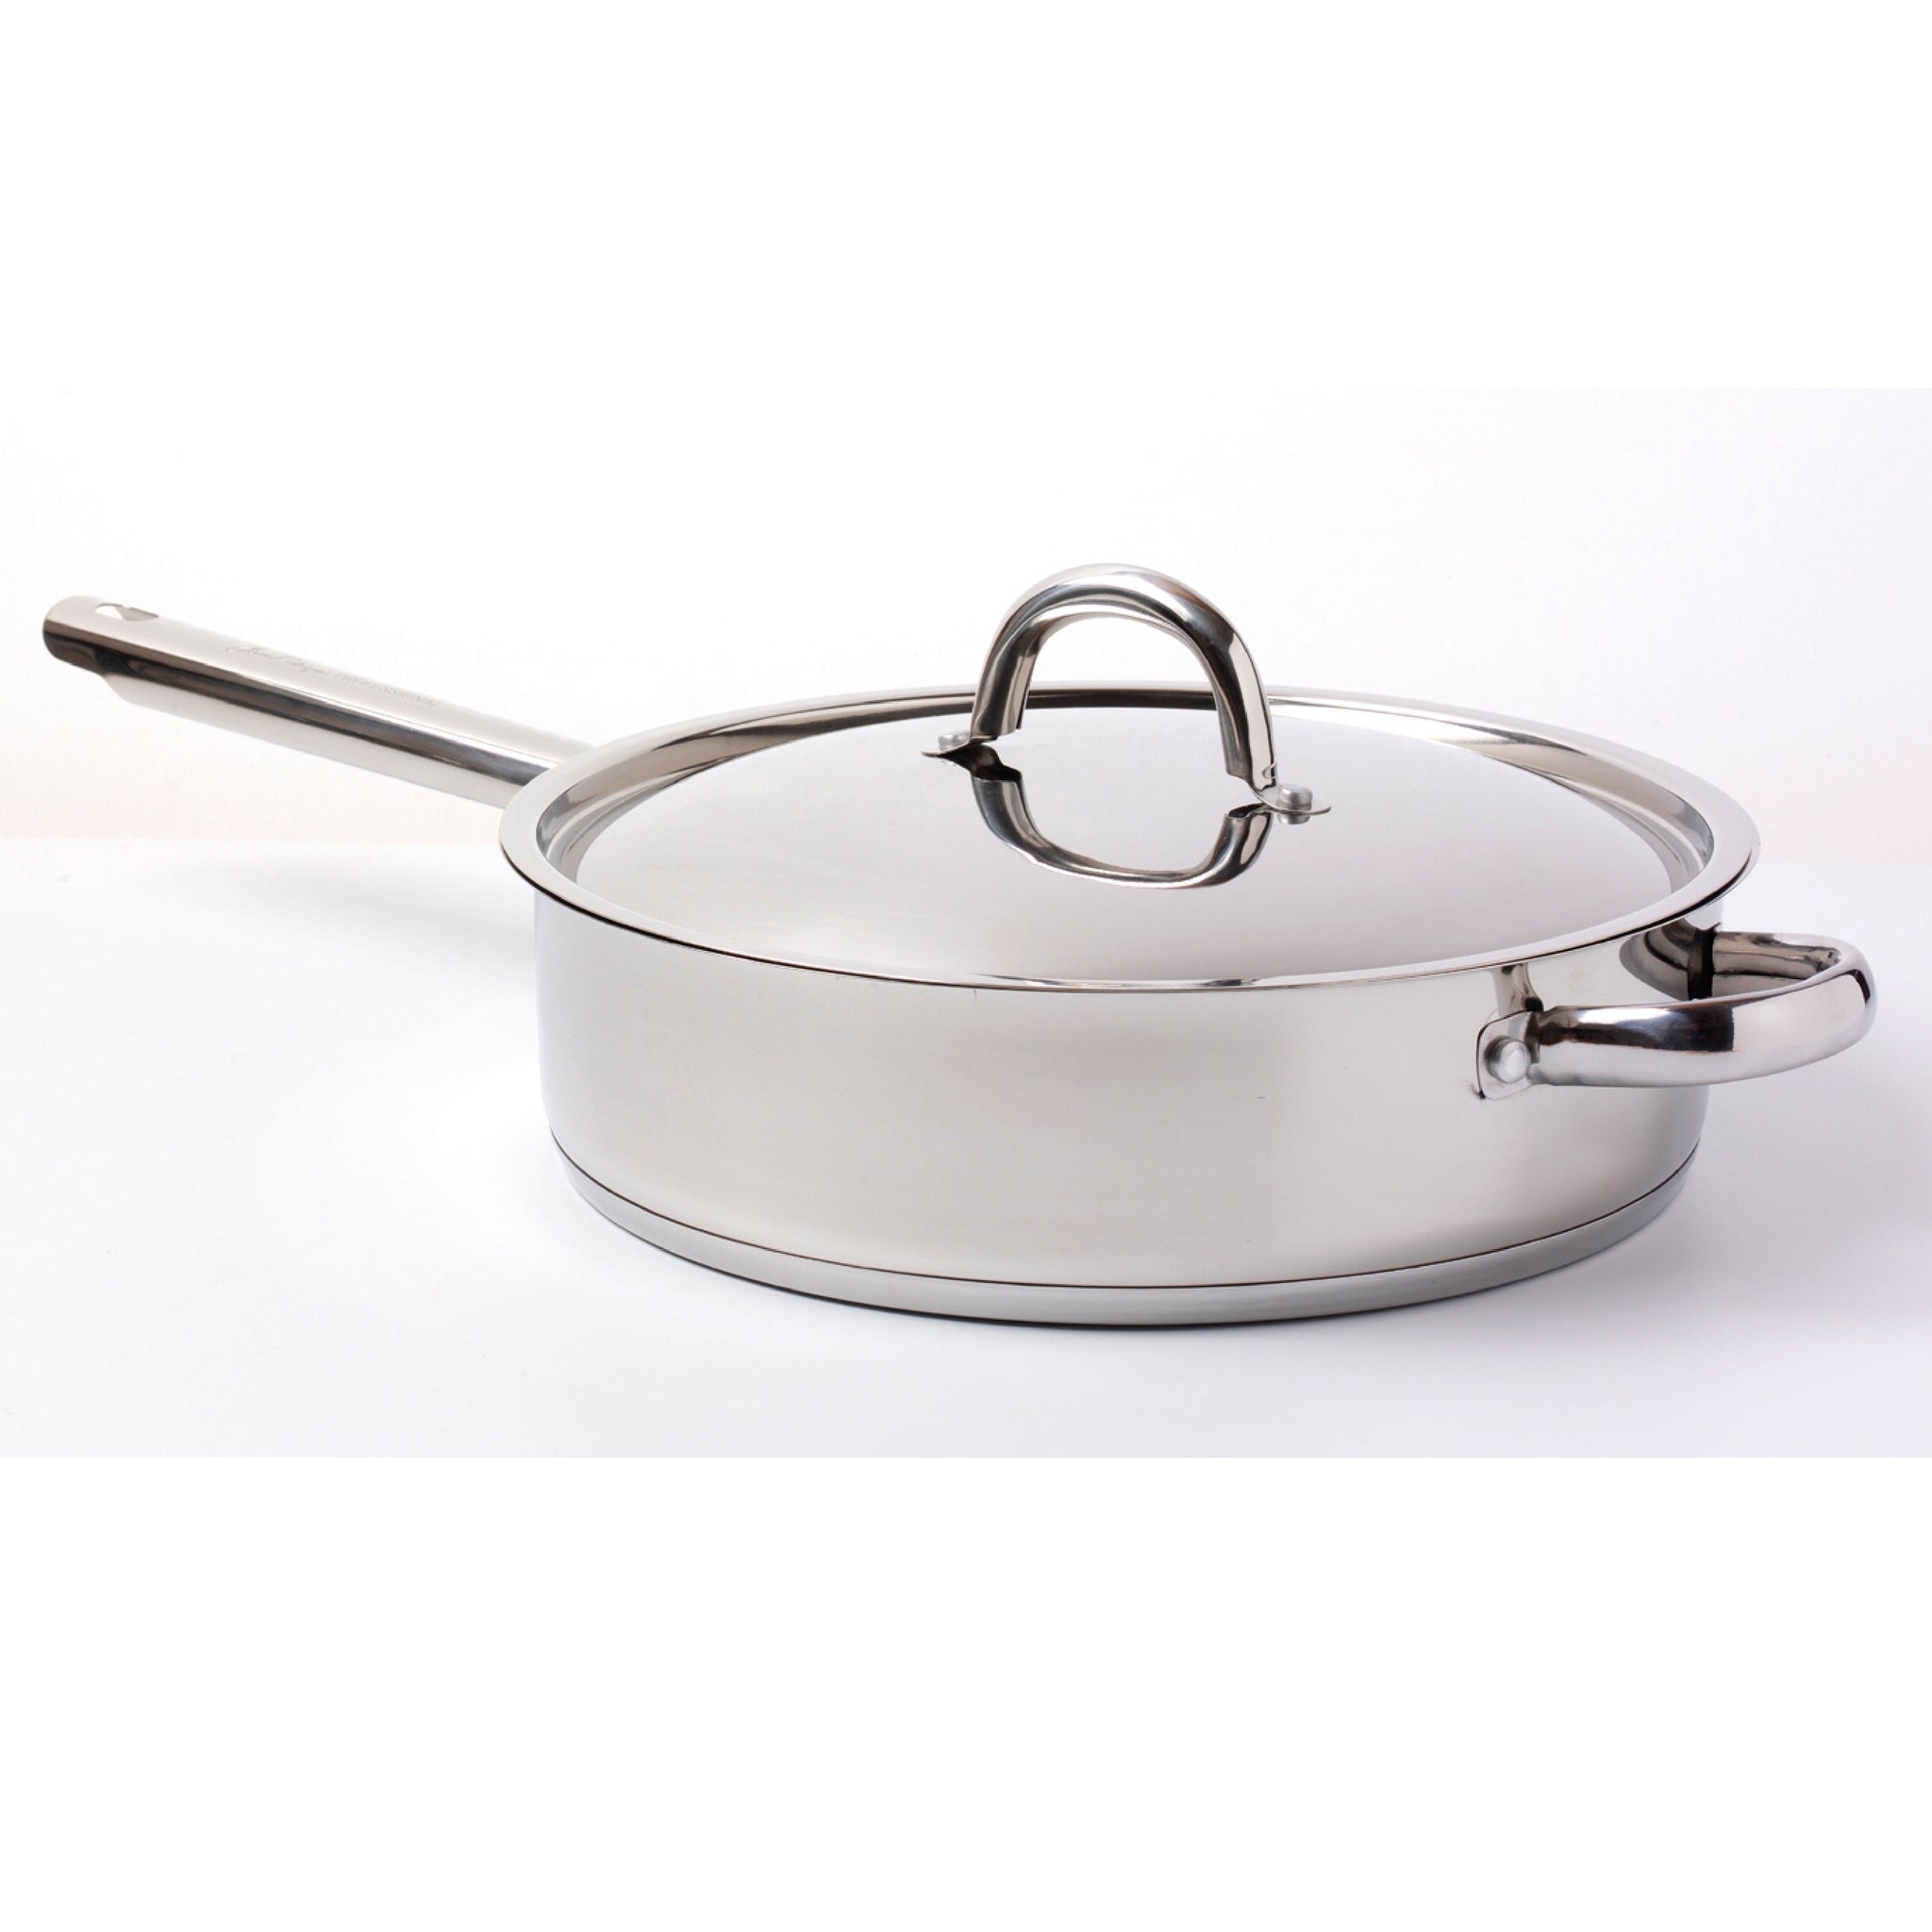 28cm Saute Pan and Stainless Steel Lid